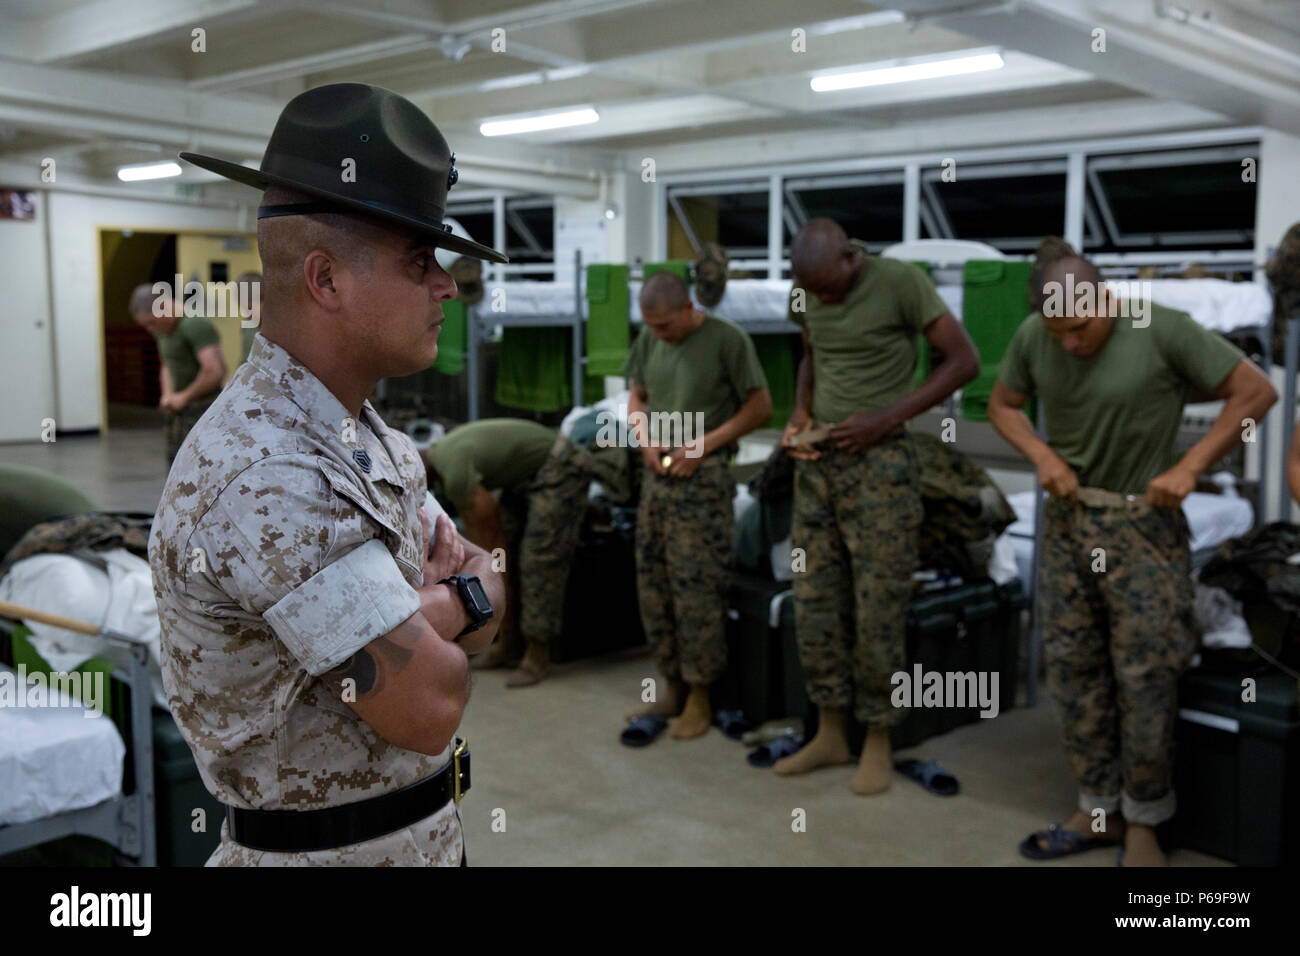 U.S. Marine Corps Gunnery Sgt. Enrique Deanda, a senior drill instructor with Company B, 1st Recruit Training Battalion, Recruit Training Regiment, supervises recruits aboard Marine Corps Recruit Depot San Diego, Calif., May 17, 2016. Deanda supervised the recruits, ensuring they properly prepared for training. (U.S. Marine Corps photo by Lance Cpl. Erick J. ClarosVillalta/Released) Stock Photo